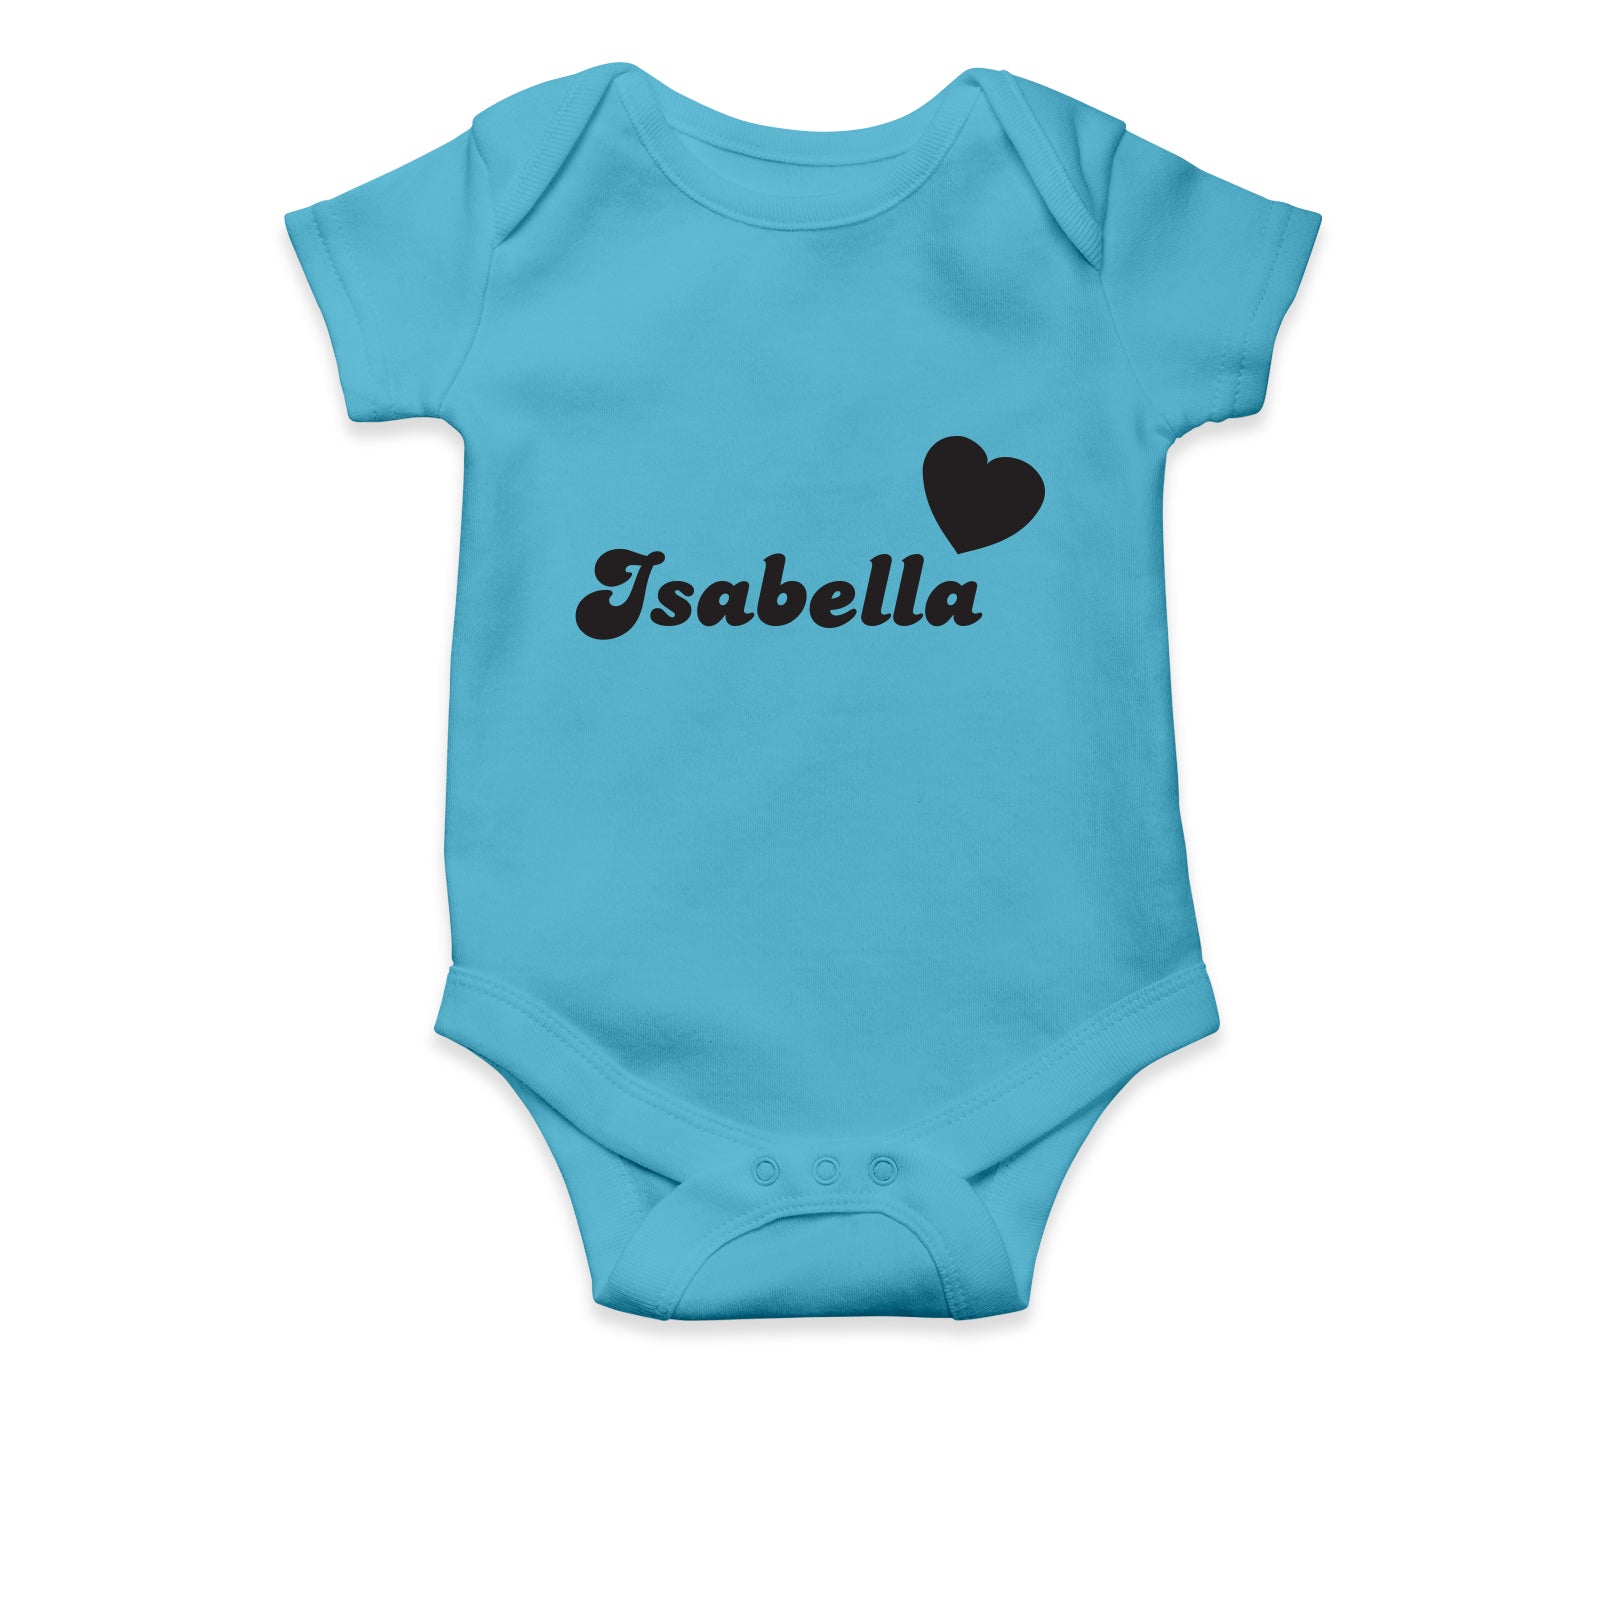 Personalised White Baby Body Suit Grow Vest - Hearts